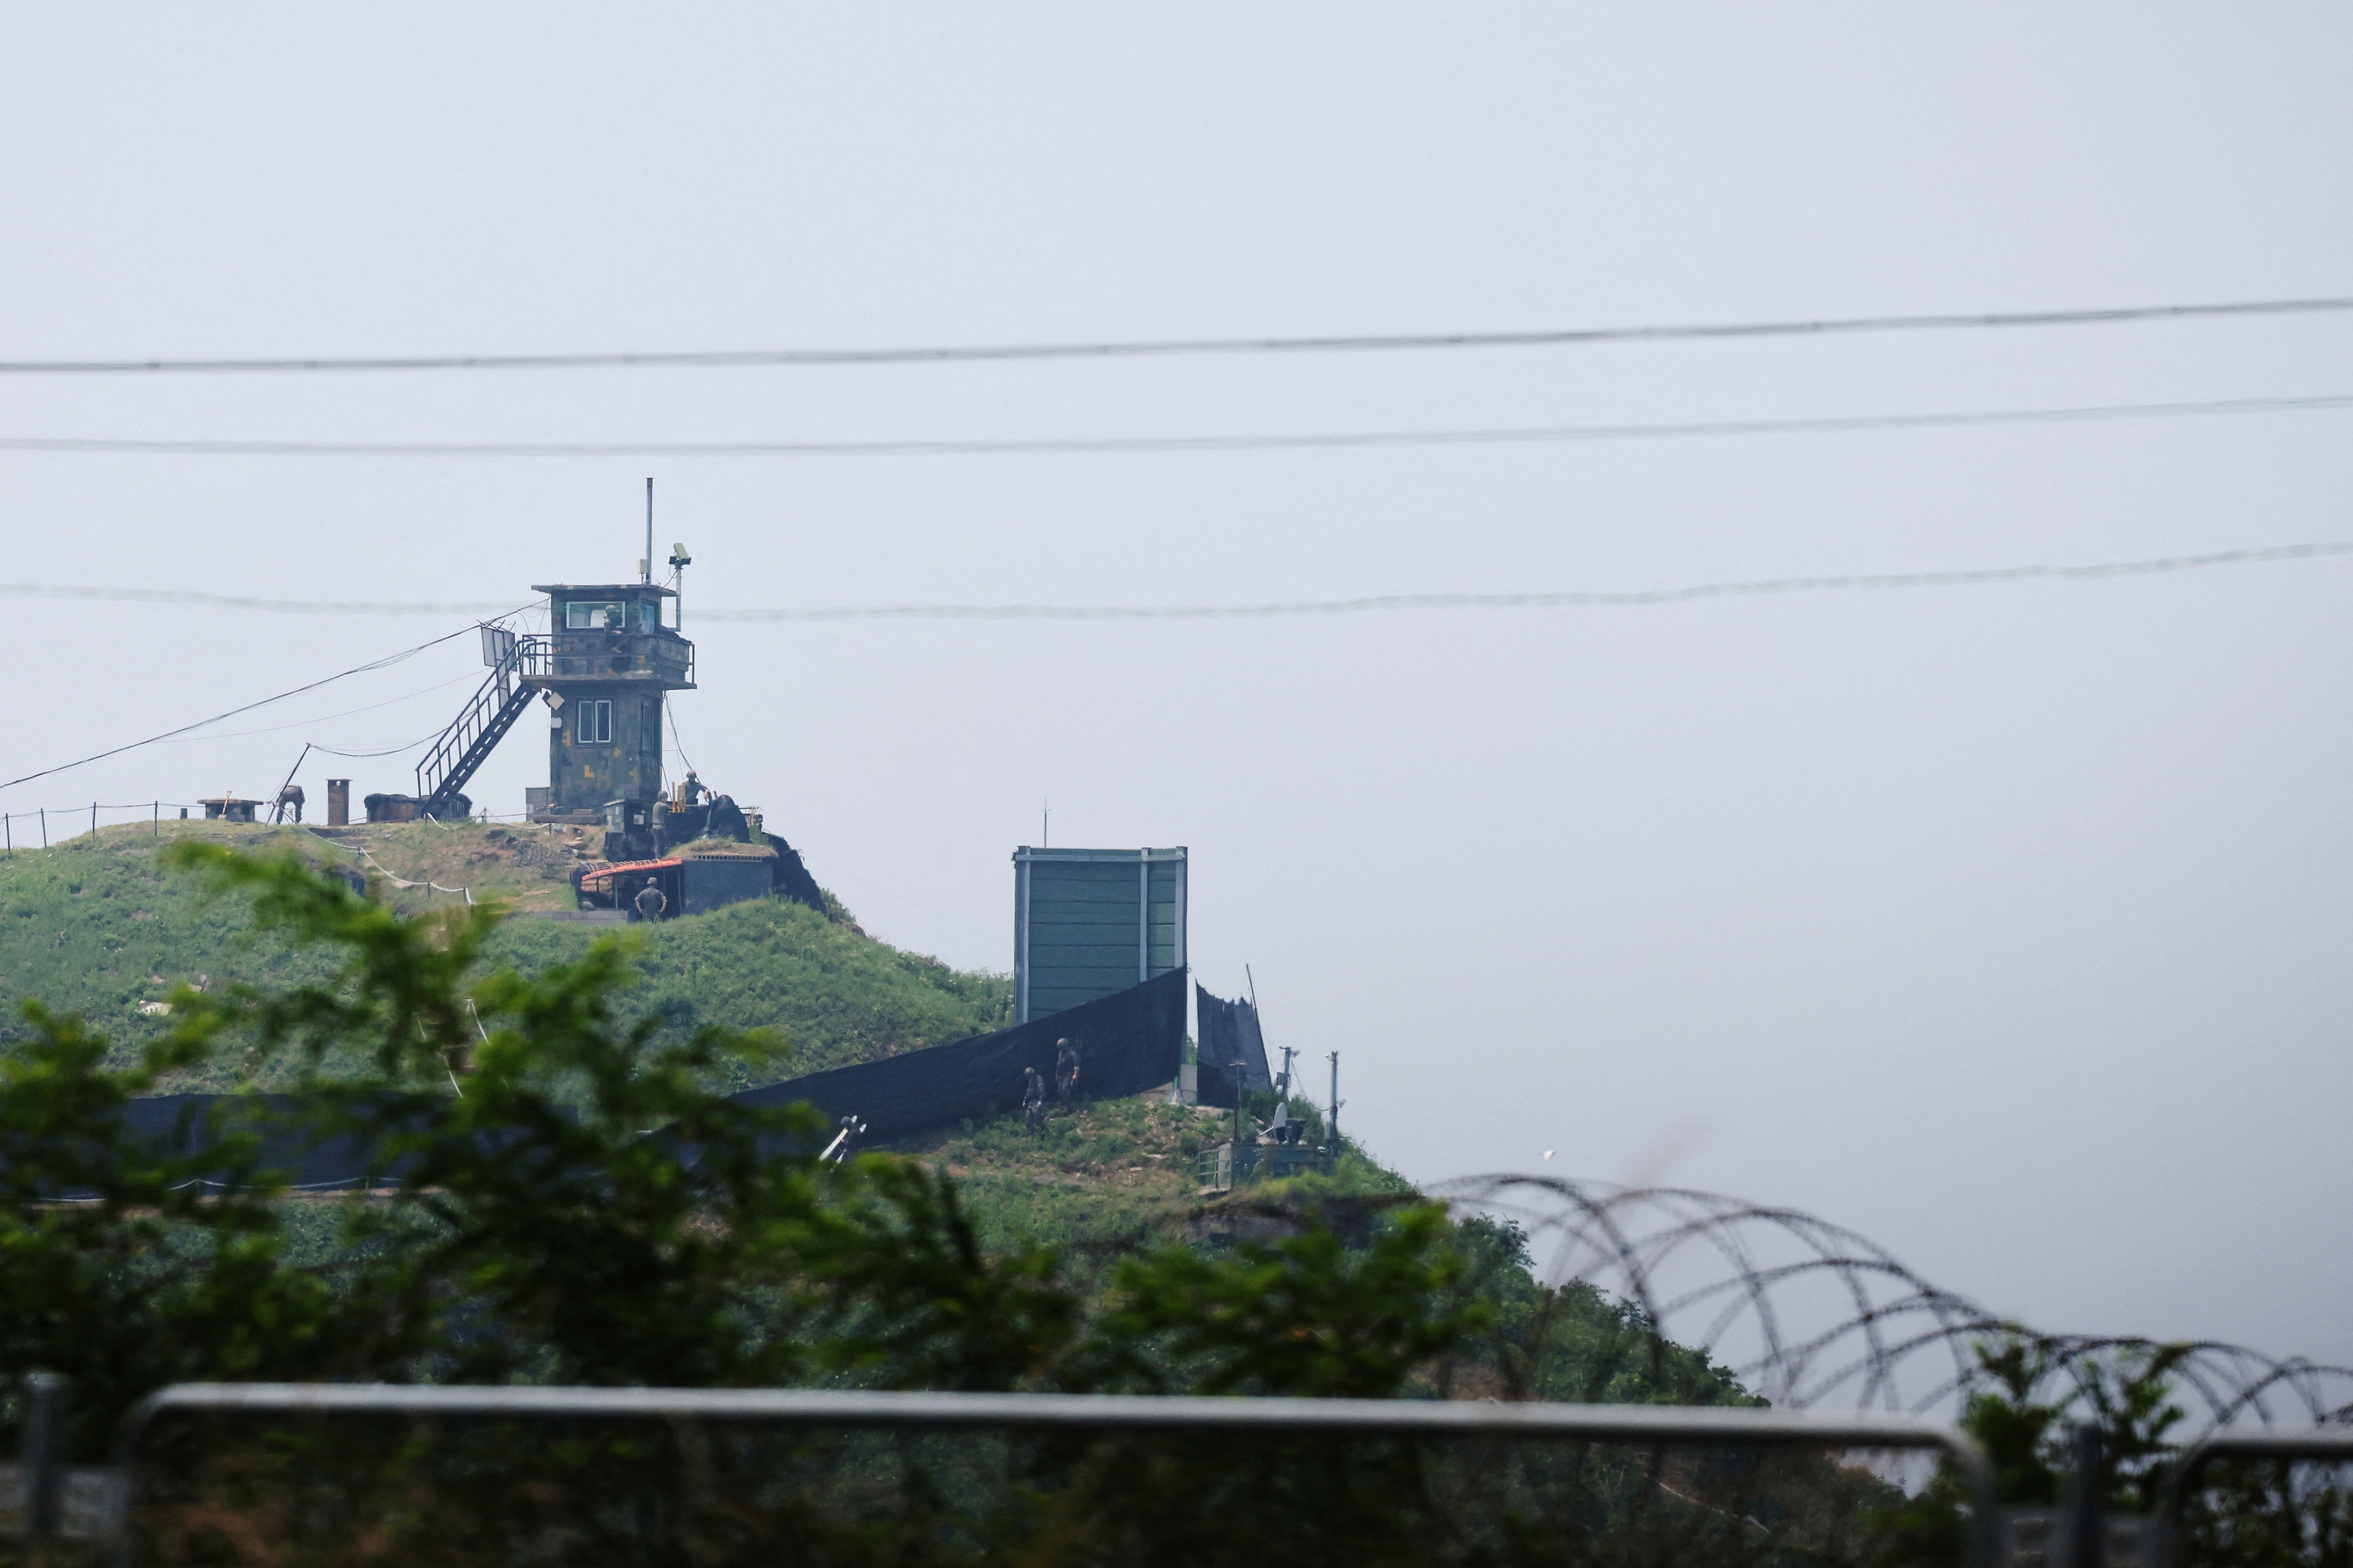 South Korean soldiers walk past a military facility where loudspeakers dismantled in 2018 used to be, near the demilitarized zone separating the two Koreas in Paju